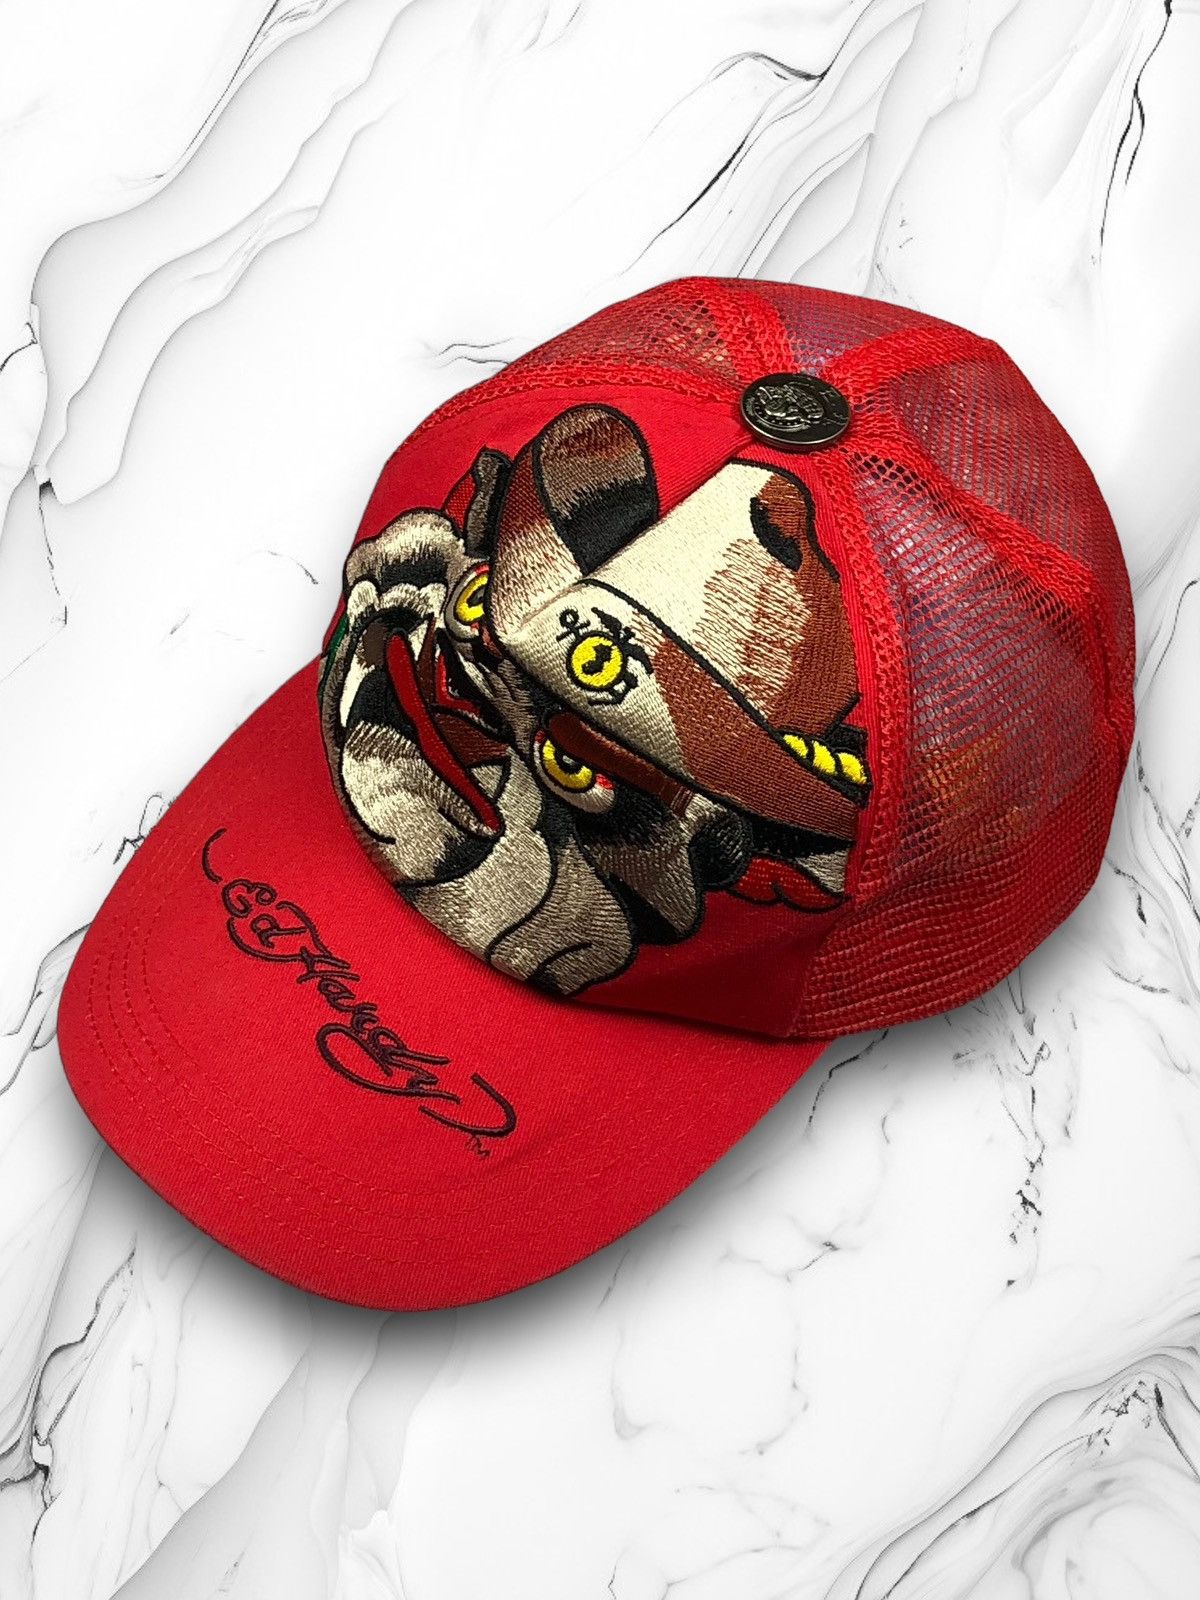 Pre-owned Christian Audigier X Ed Hardy Vintage Y2k Ed Hardy Christian Audigier Bulldog Trucker Cap In Red